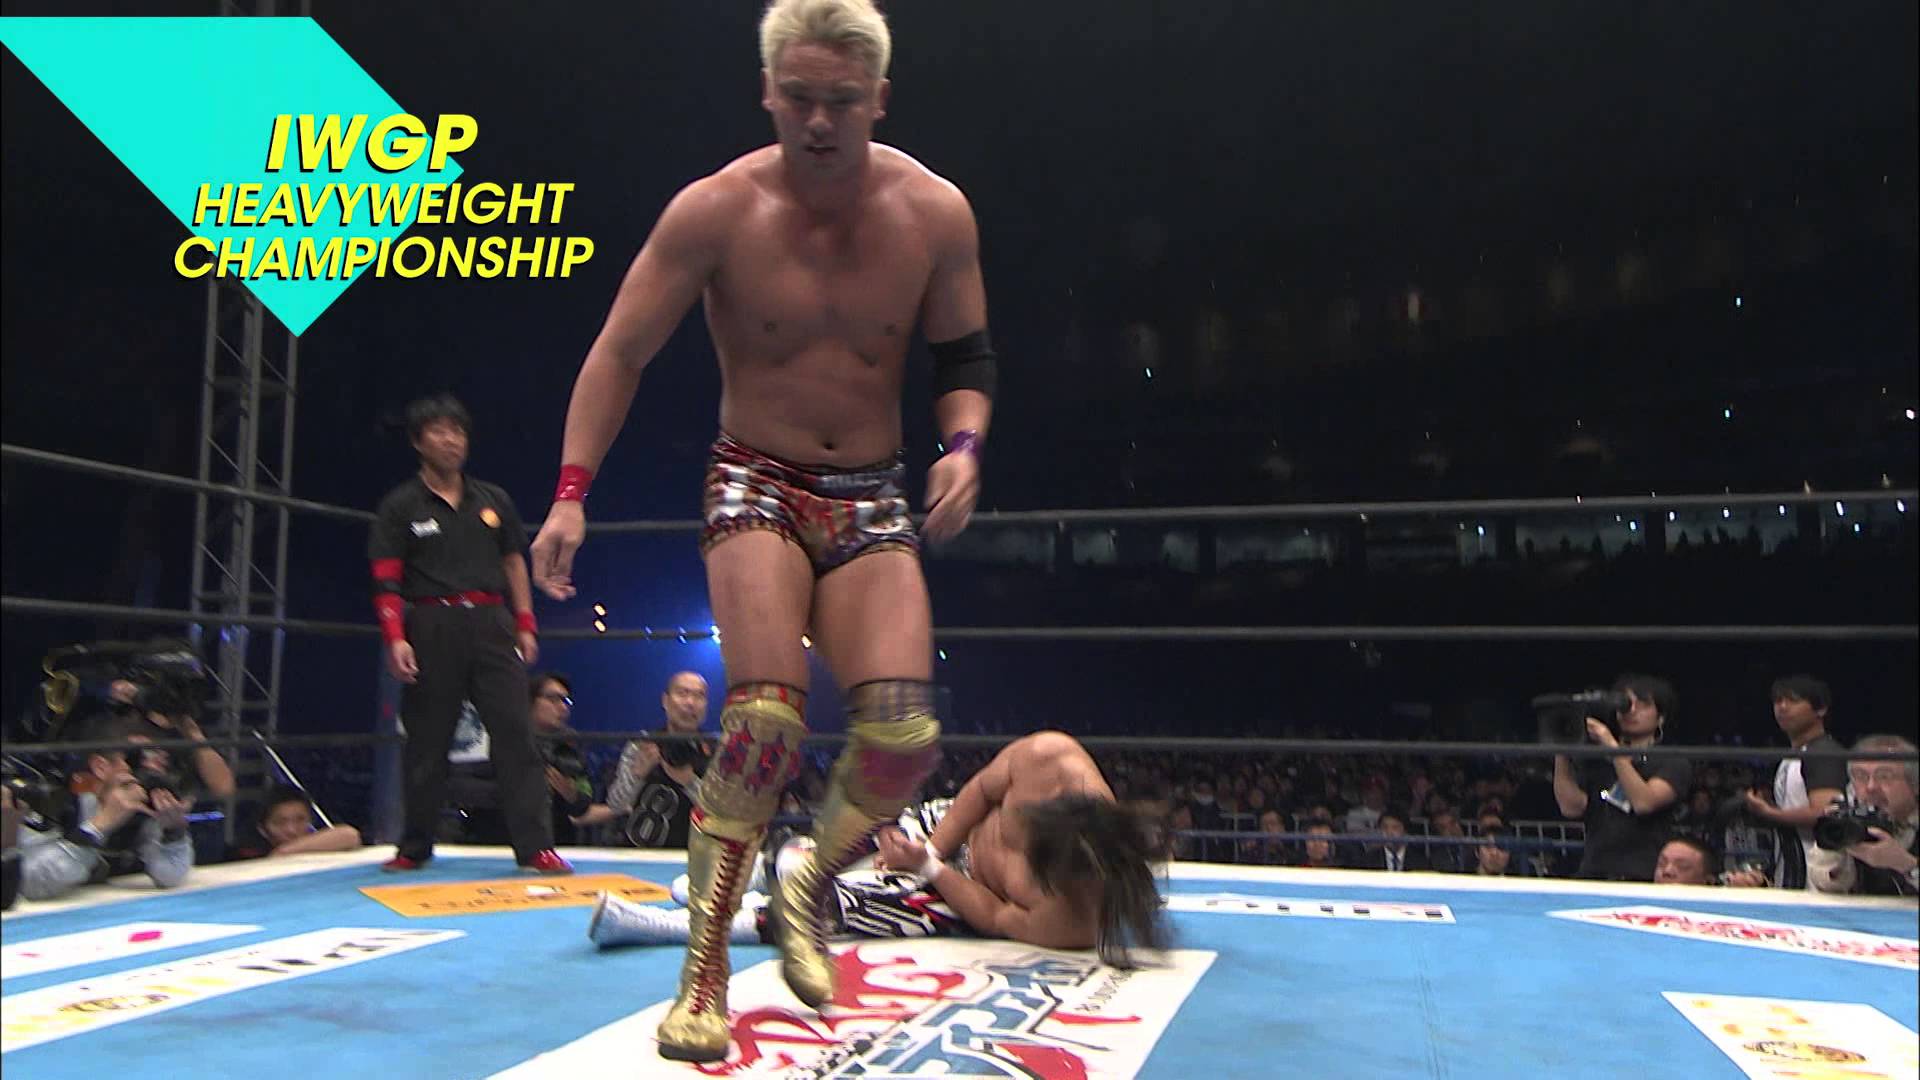 AXS TV's 'Wrestle Kingdom 9' Coverage Concludes With Tanahashi vs